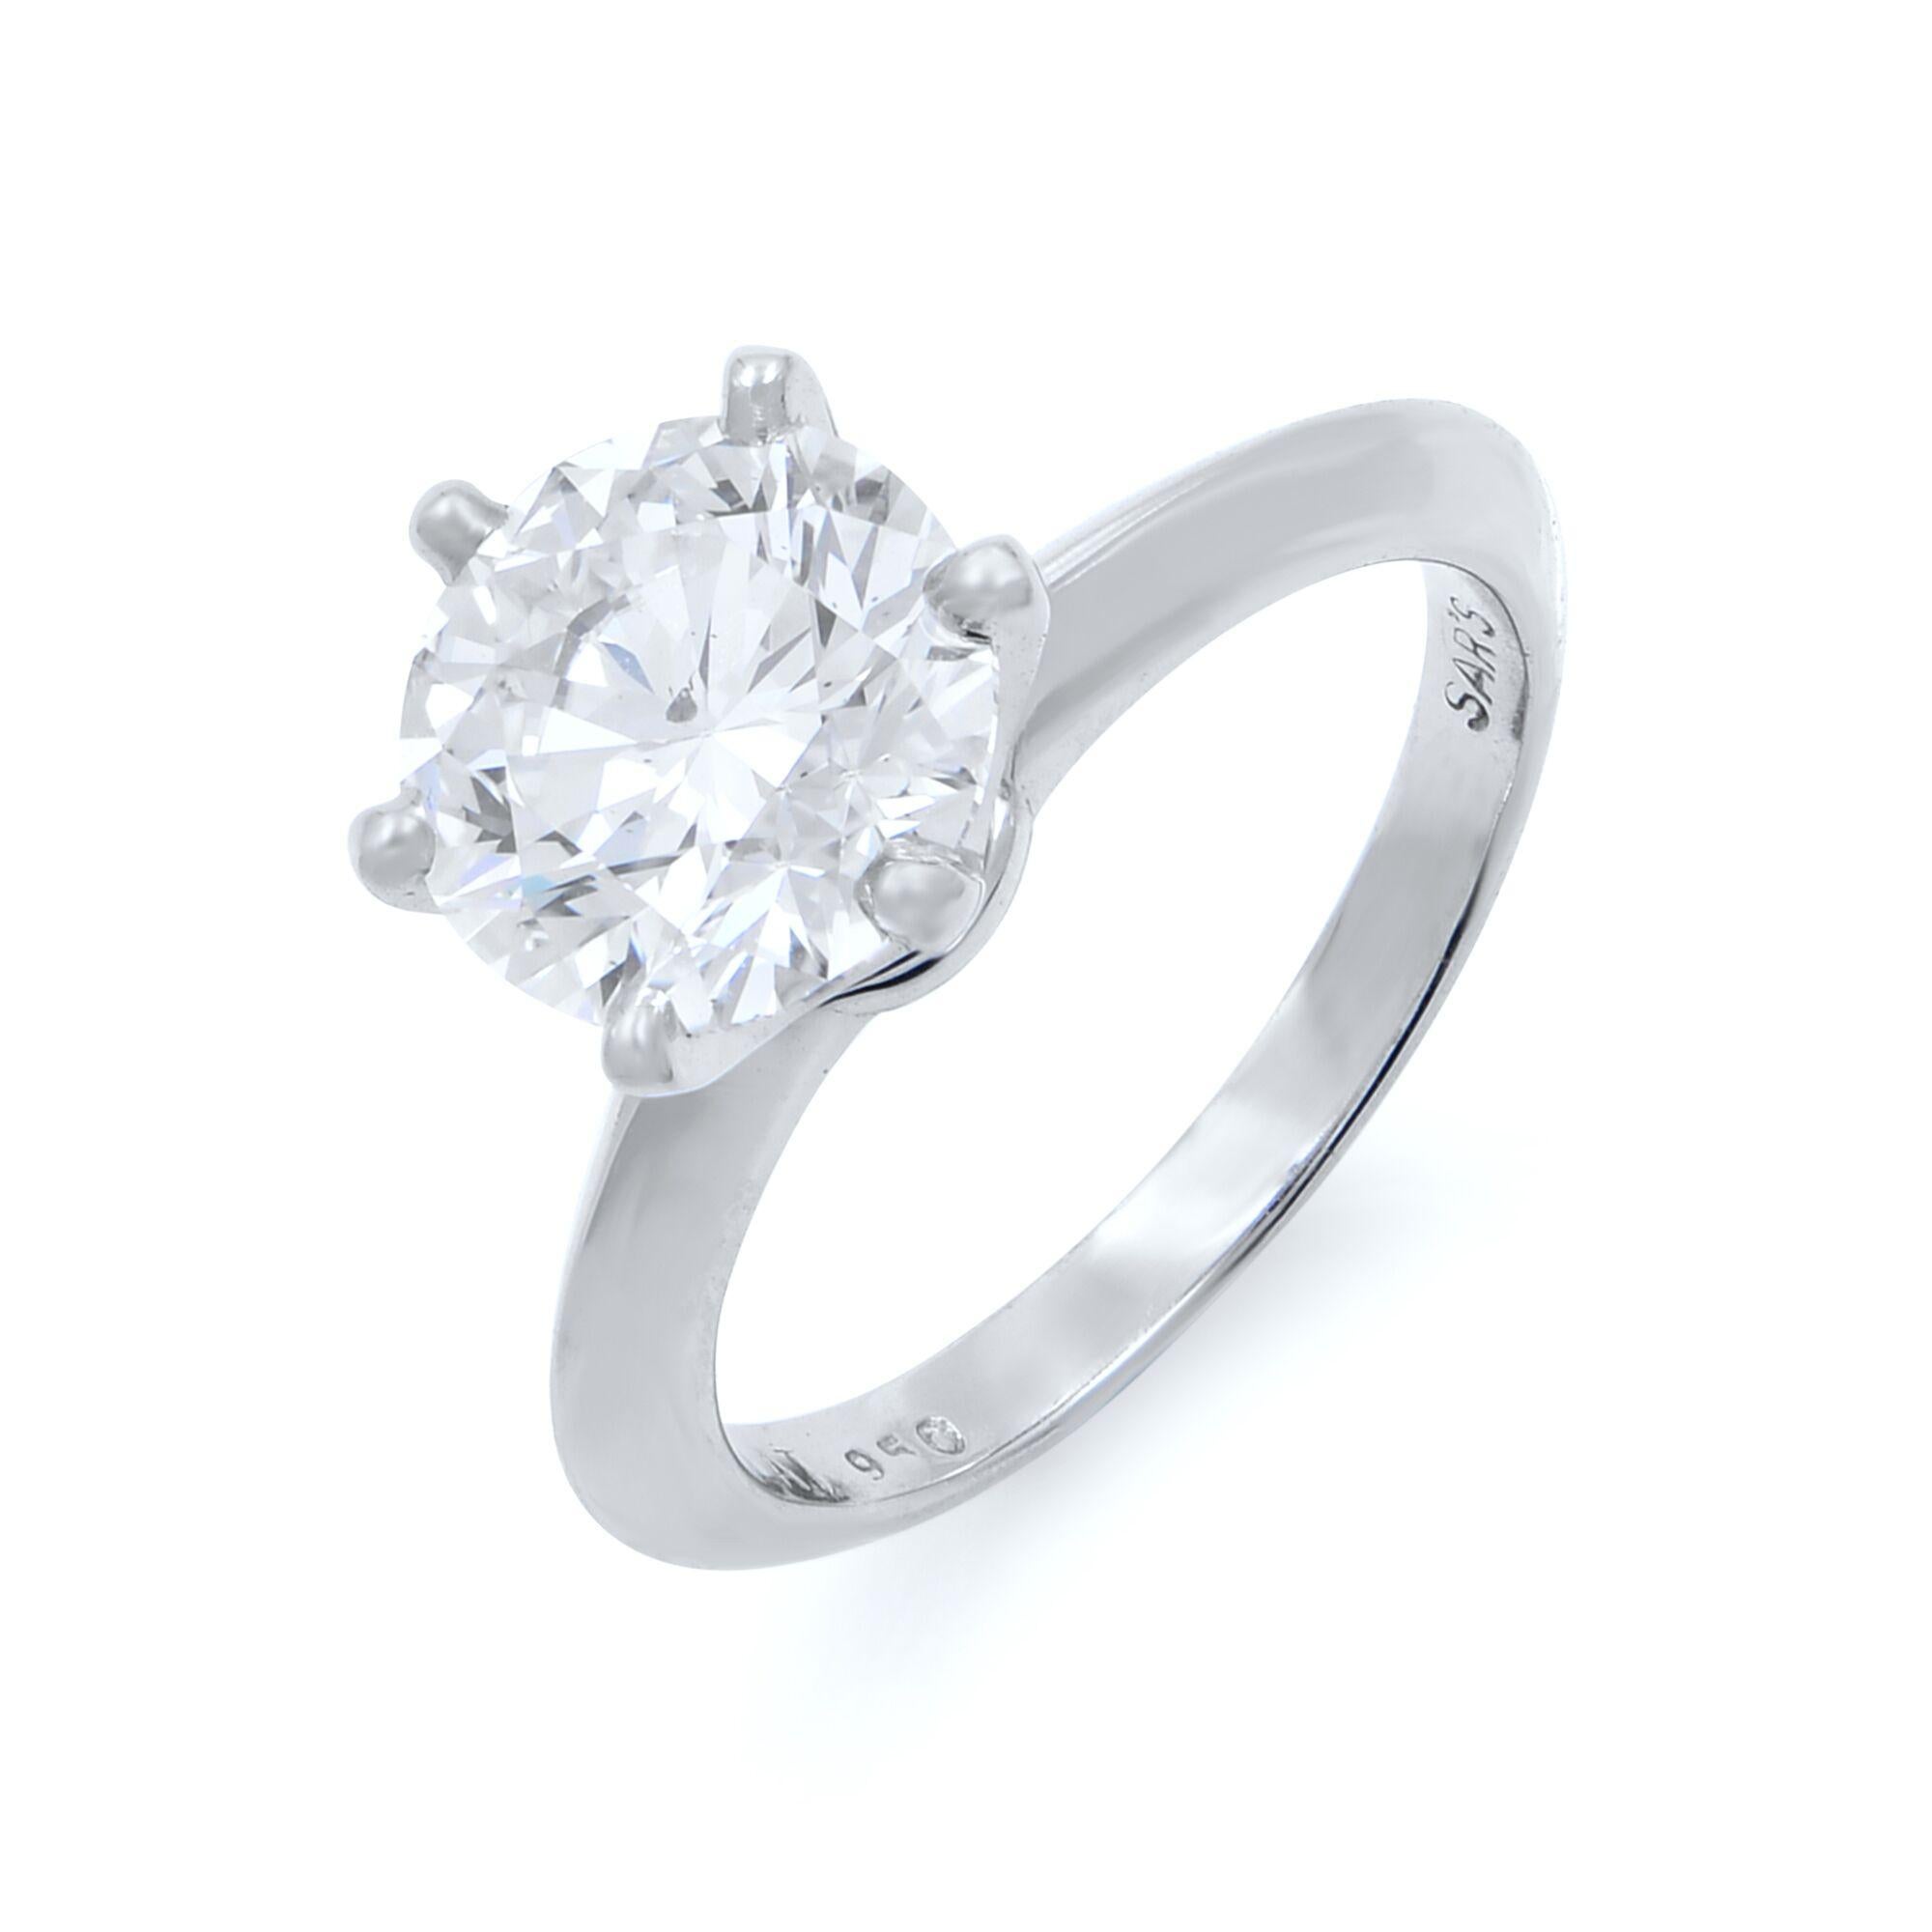 Hear her say yes to this amazing solitaire engagement ring. This ring is beautifully crafted in platinum 950. It showcases a magnificent 8.89 mm round brilliant 2.69 carat diamond. Standing tall in the traditional six-prong setting. This ring is